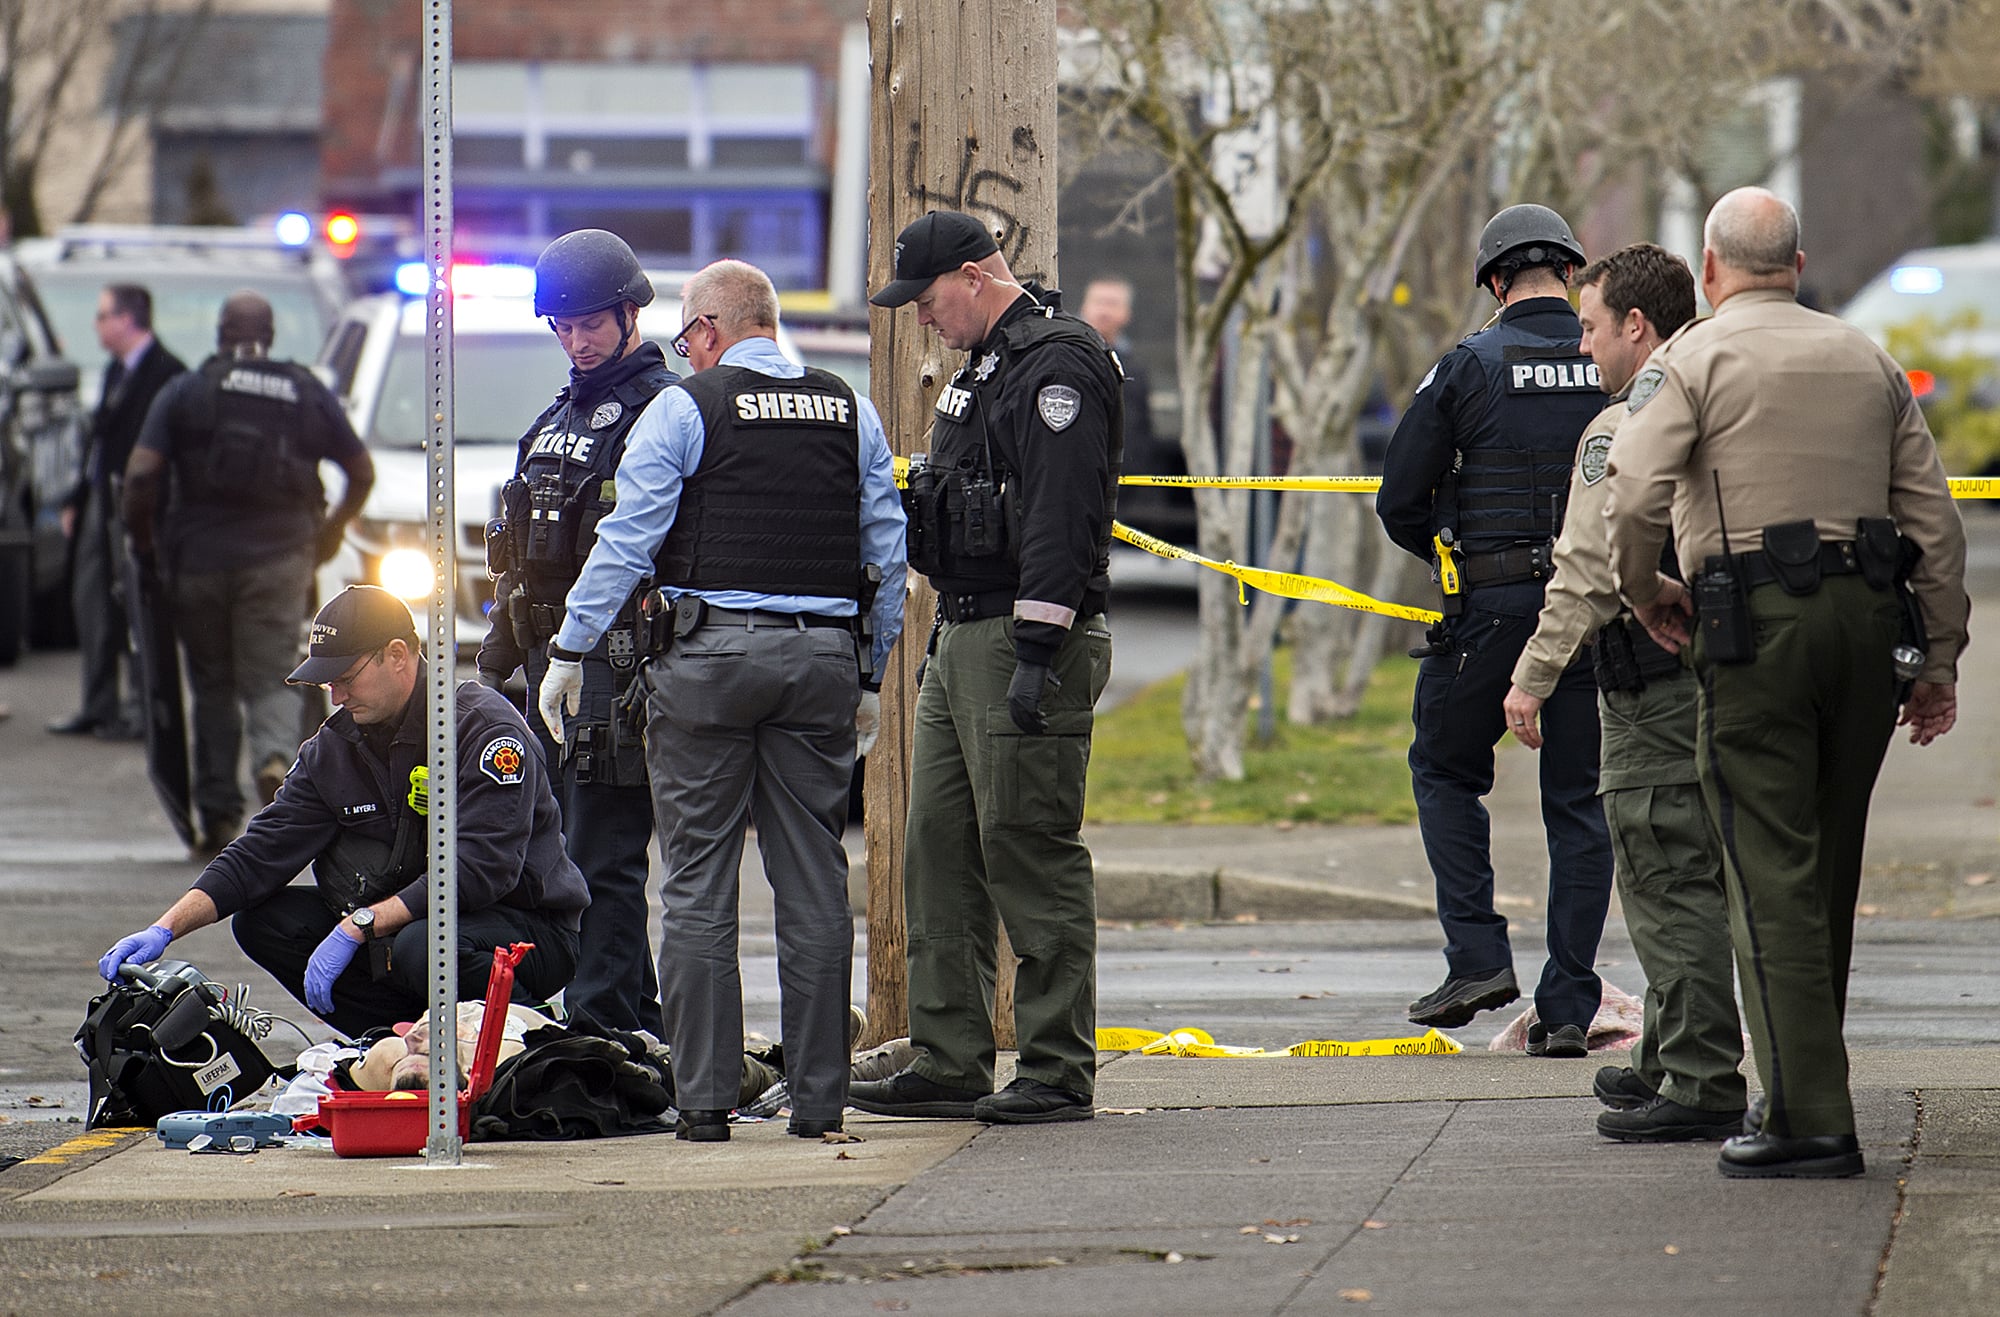 A Vancouver Fire Department paramedic checks for life signs on a man who was shot by police at the corner of West 12th Street and Jefferson Street in downtown Vancouver on Thursday afternoon, Feb. 28, 2019.